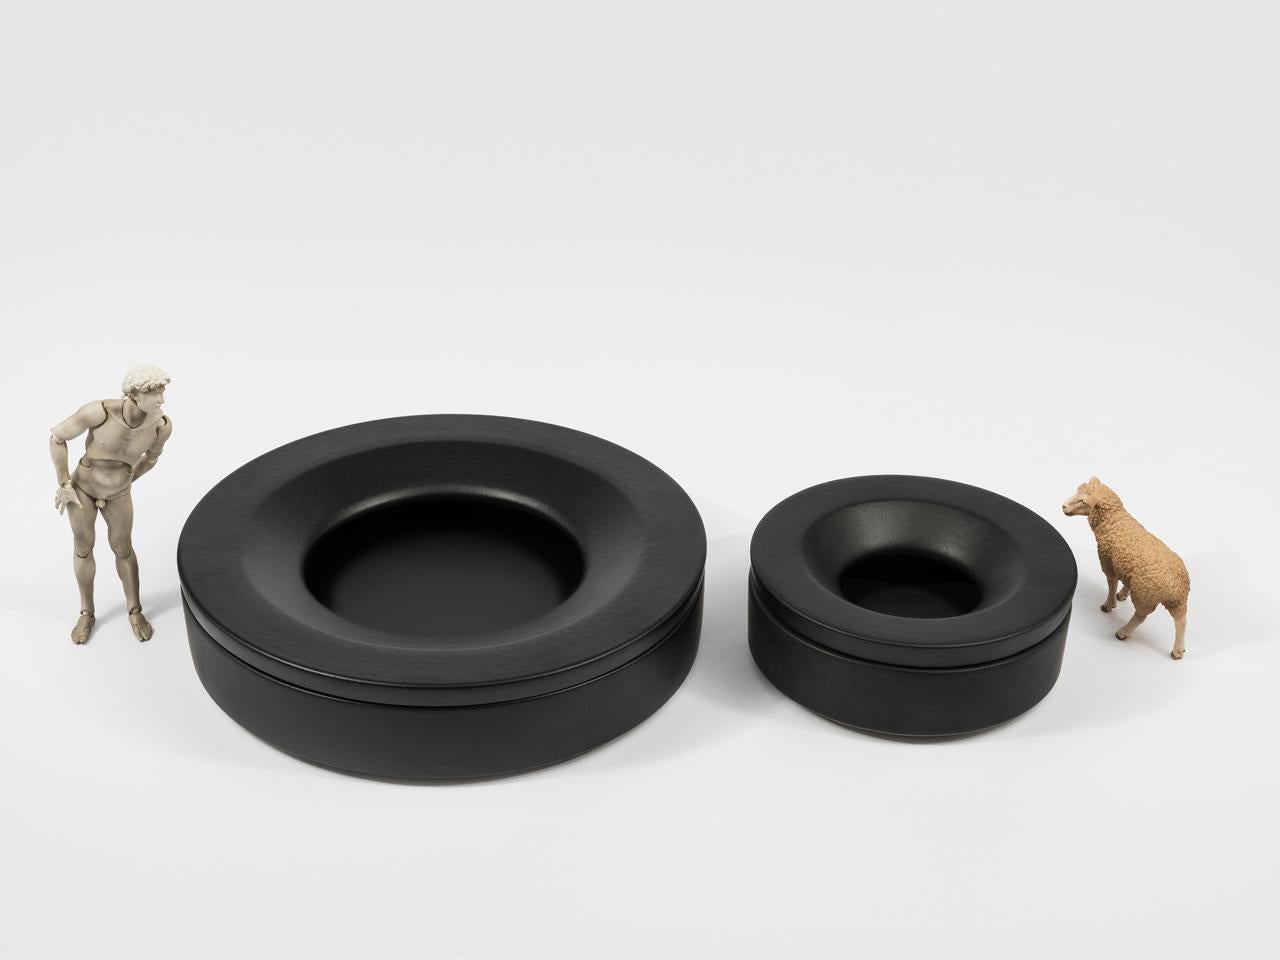 Large Black Barbados is a glazed ceramic ashtray made up of two parts: a circular base and a ring shaped lid that fits on top and hides part of the contents. The simple, pure geometry of the design give Barbados a distinctive aura that almost turns